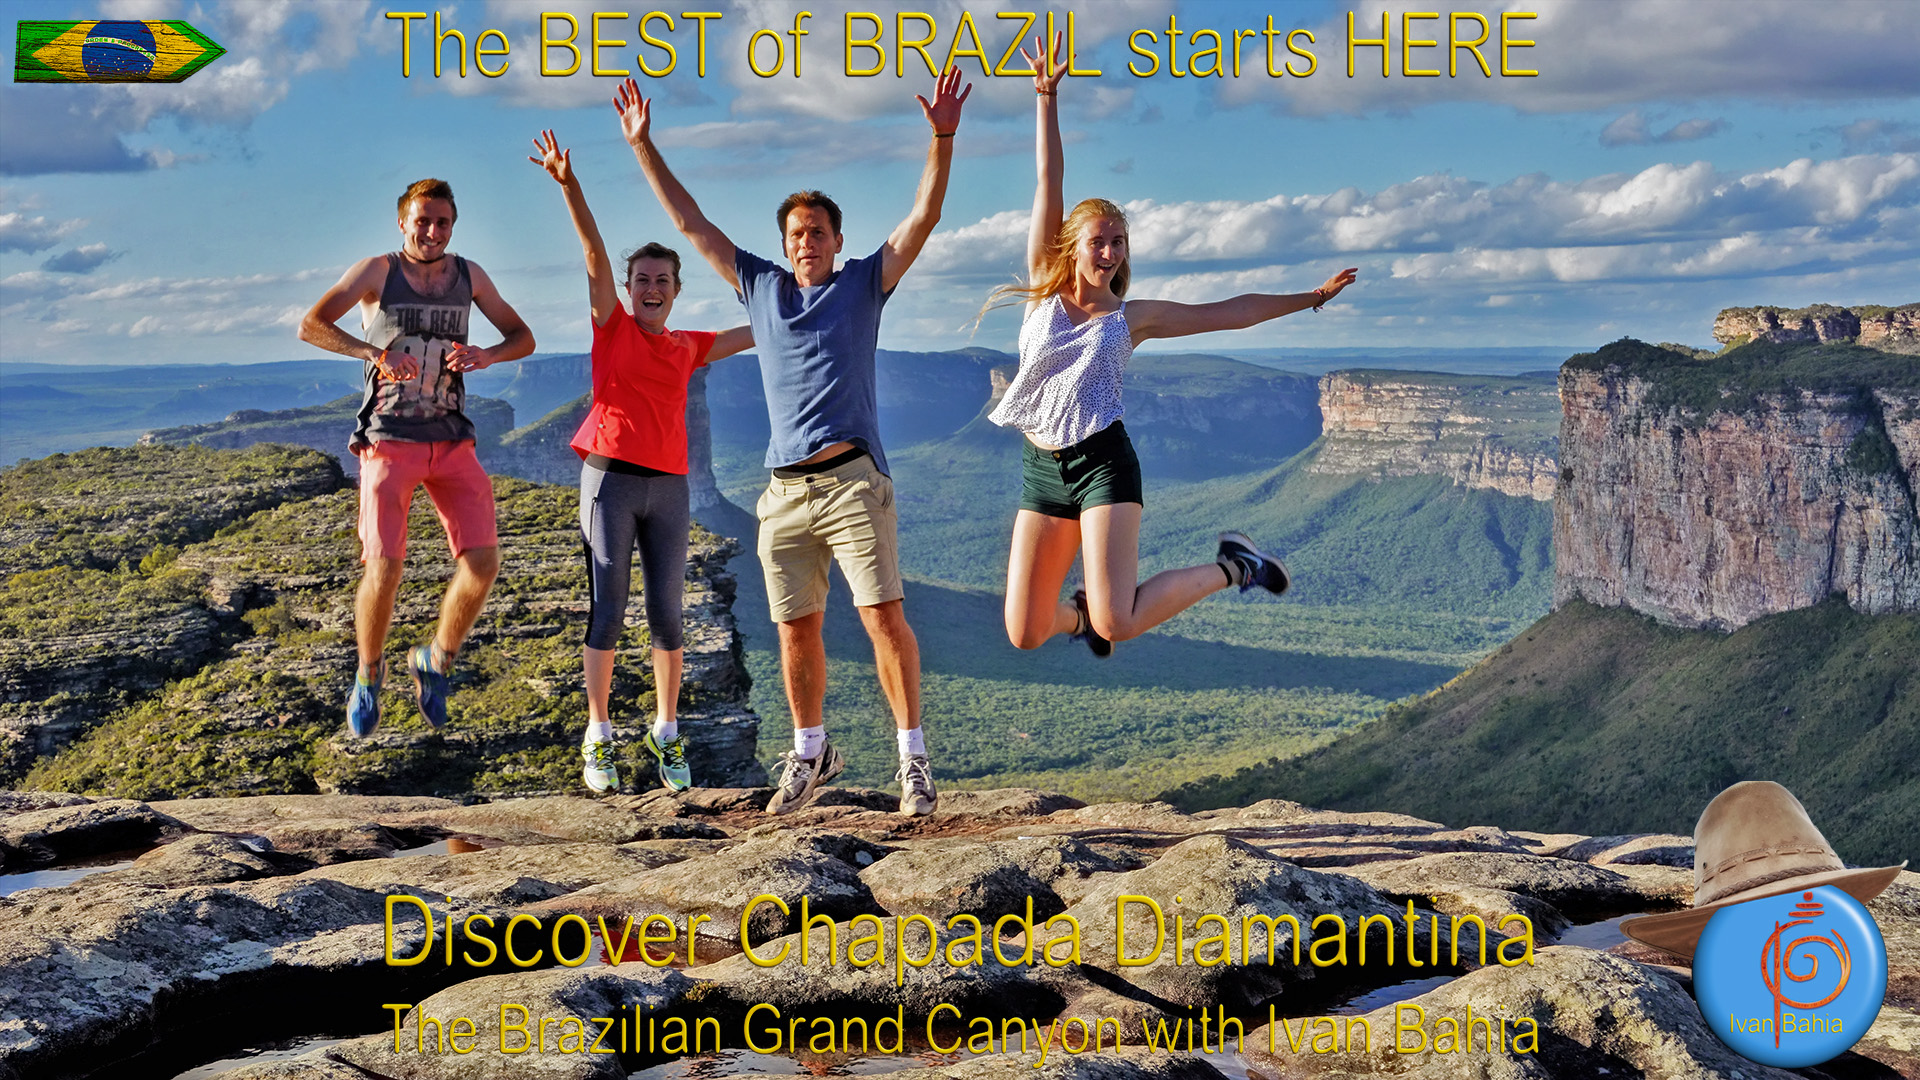 Discover Bahia with Ivan Bahia private tour-guide / travel agency, for the best experience in Salvador, Chapada Diamantina National Park and Bahia /NE-Brazil - Photography by Ivan Bahia Guide, traveling in Brazil, reisgids in Brazilie, #BahiaMetisse #FotosBahia #IvanBahiaGuide #IvanSalvadorBahia #SalvadorBahiaTravel #ToursByLocals #chapadadiamantina #chapadadiamantinaguide